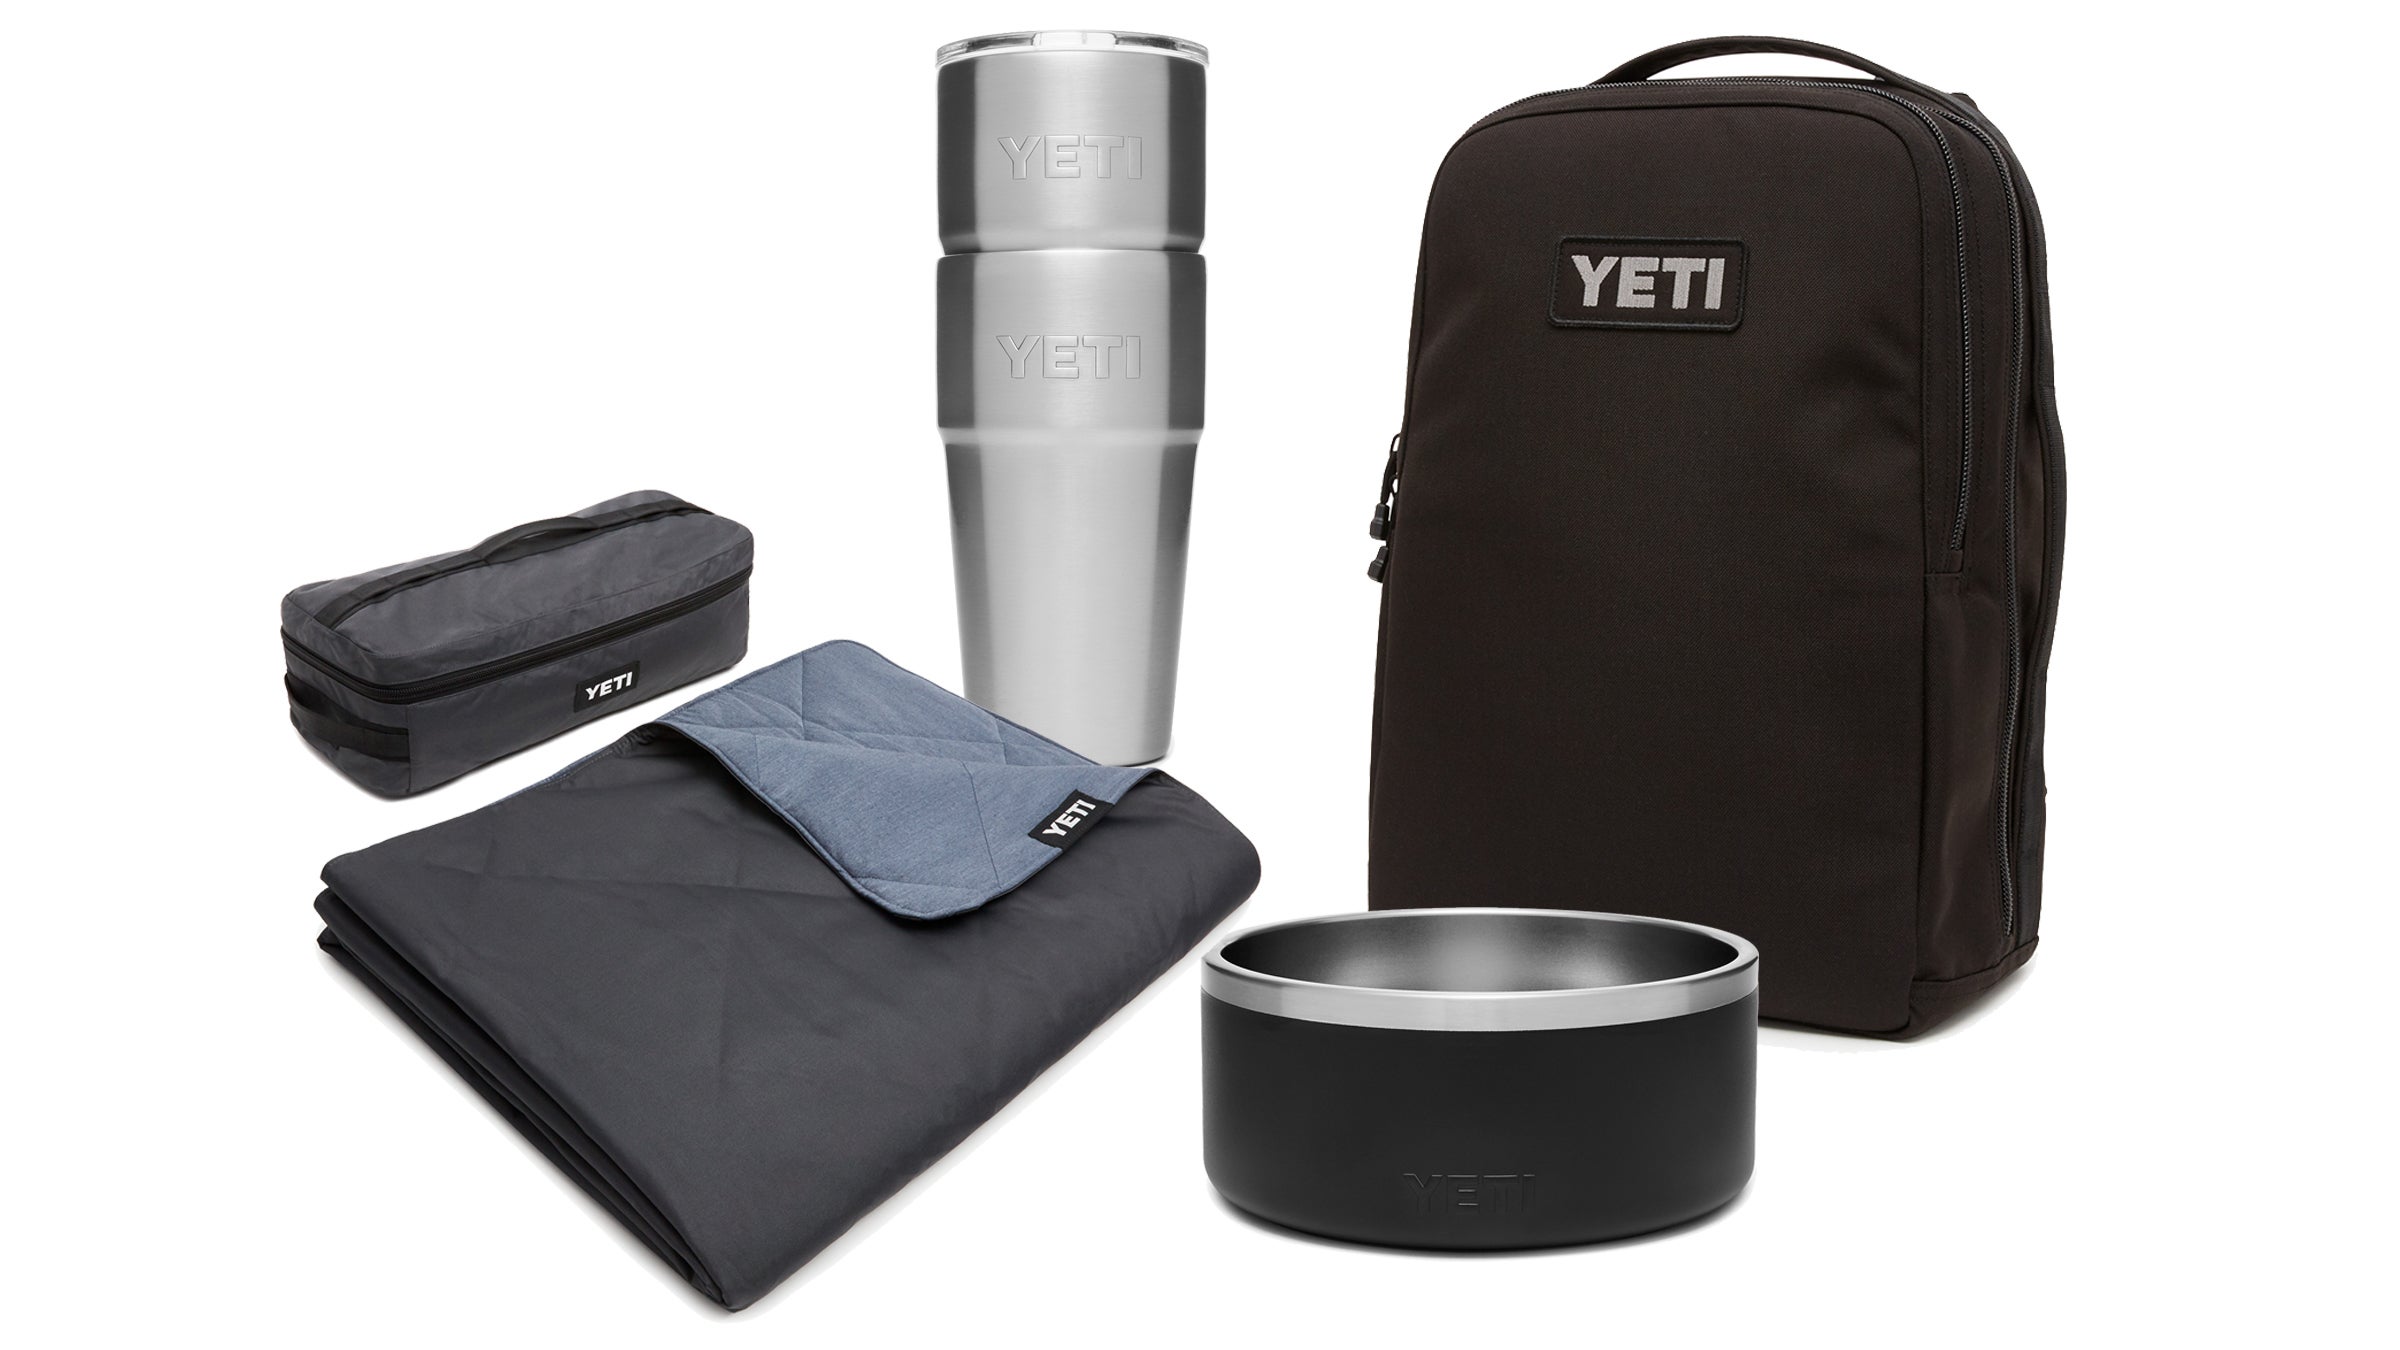 Yeti Launches Daypack, Dog Bowl, Blanket, and More